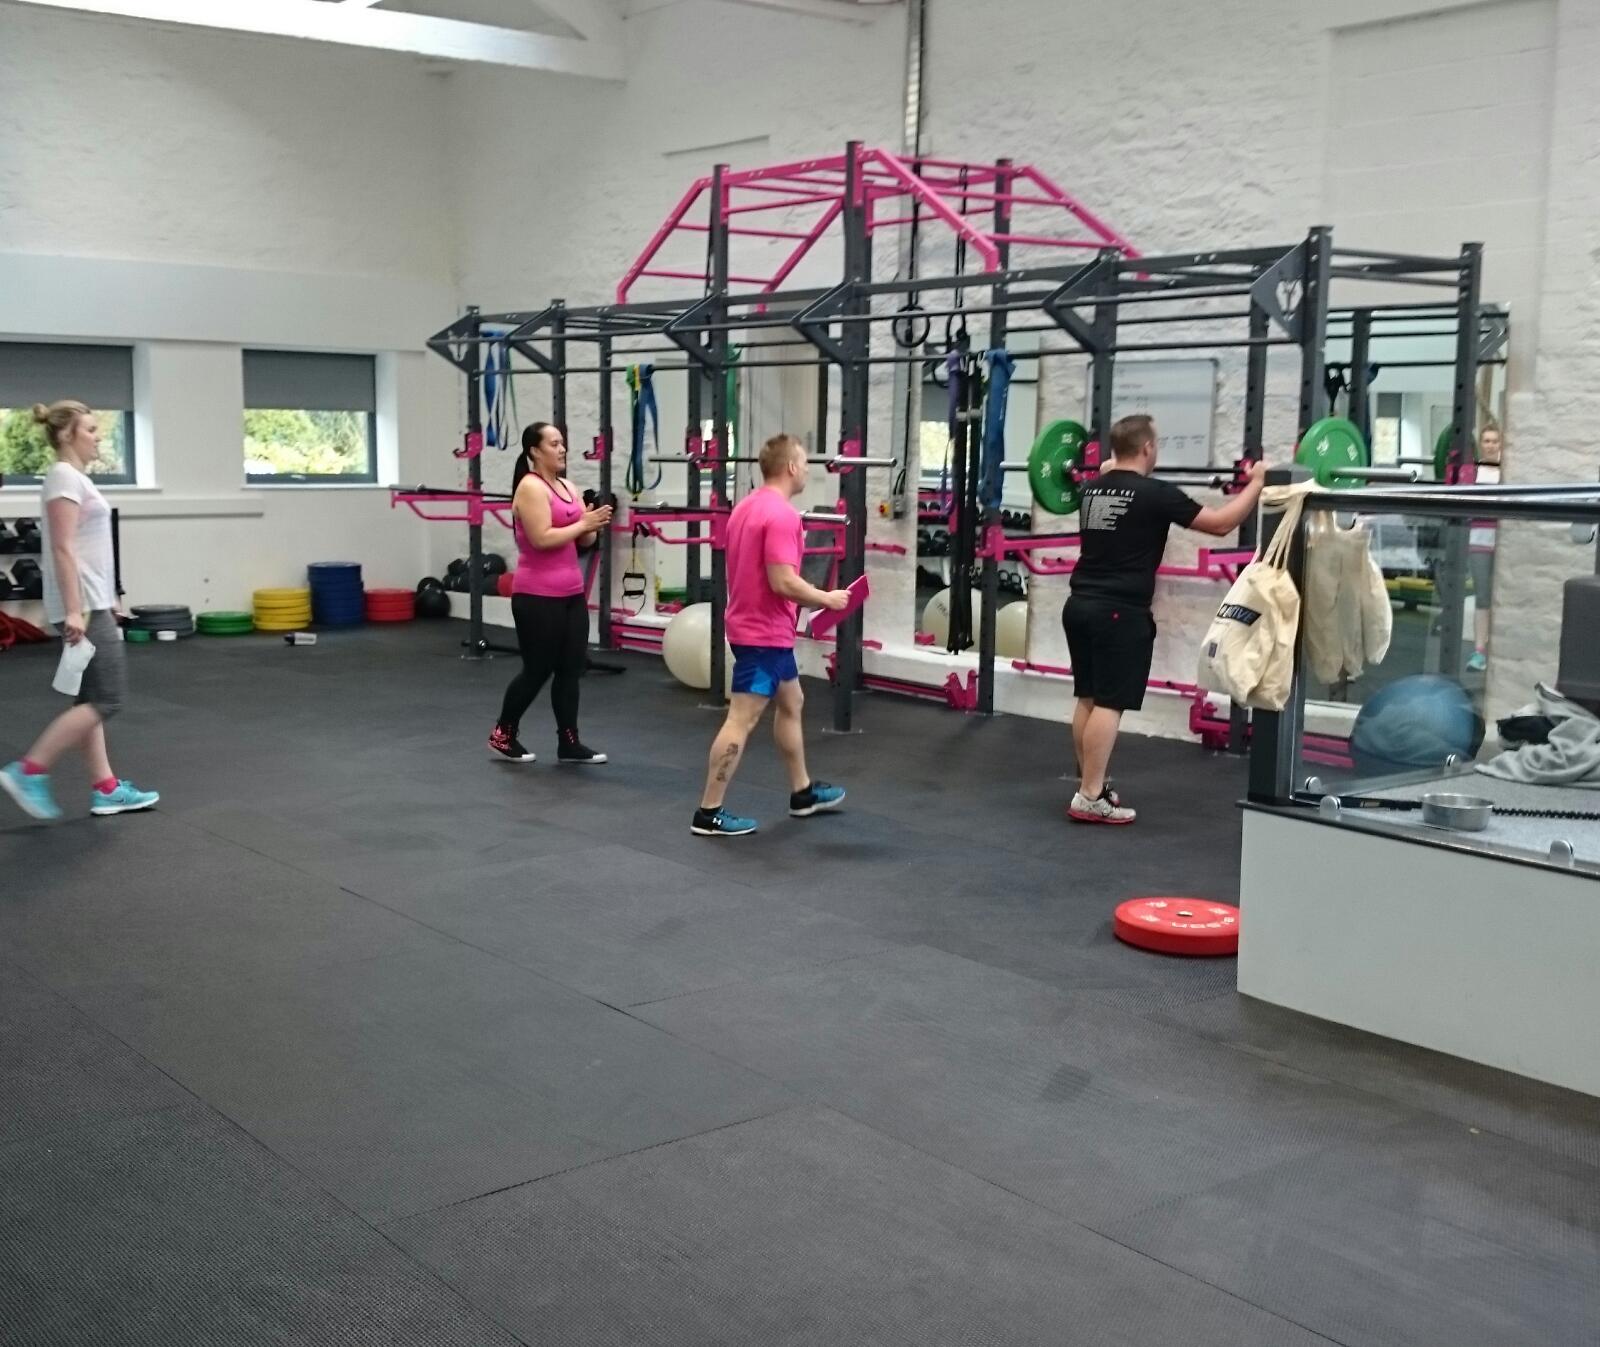 Strength & Conditioning – challenging but fun!